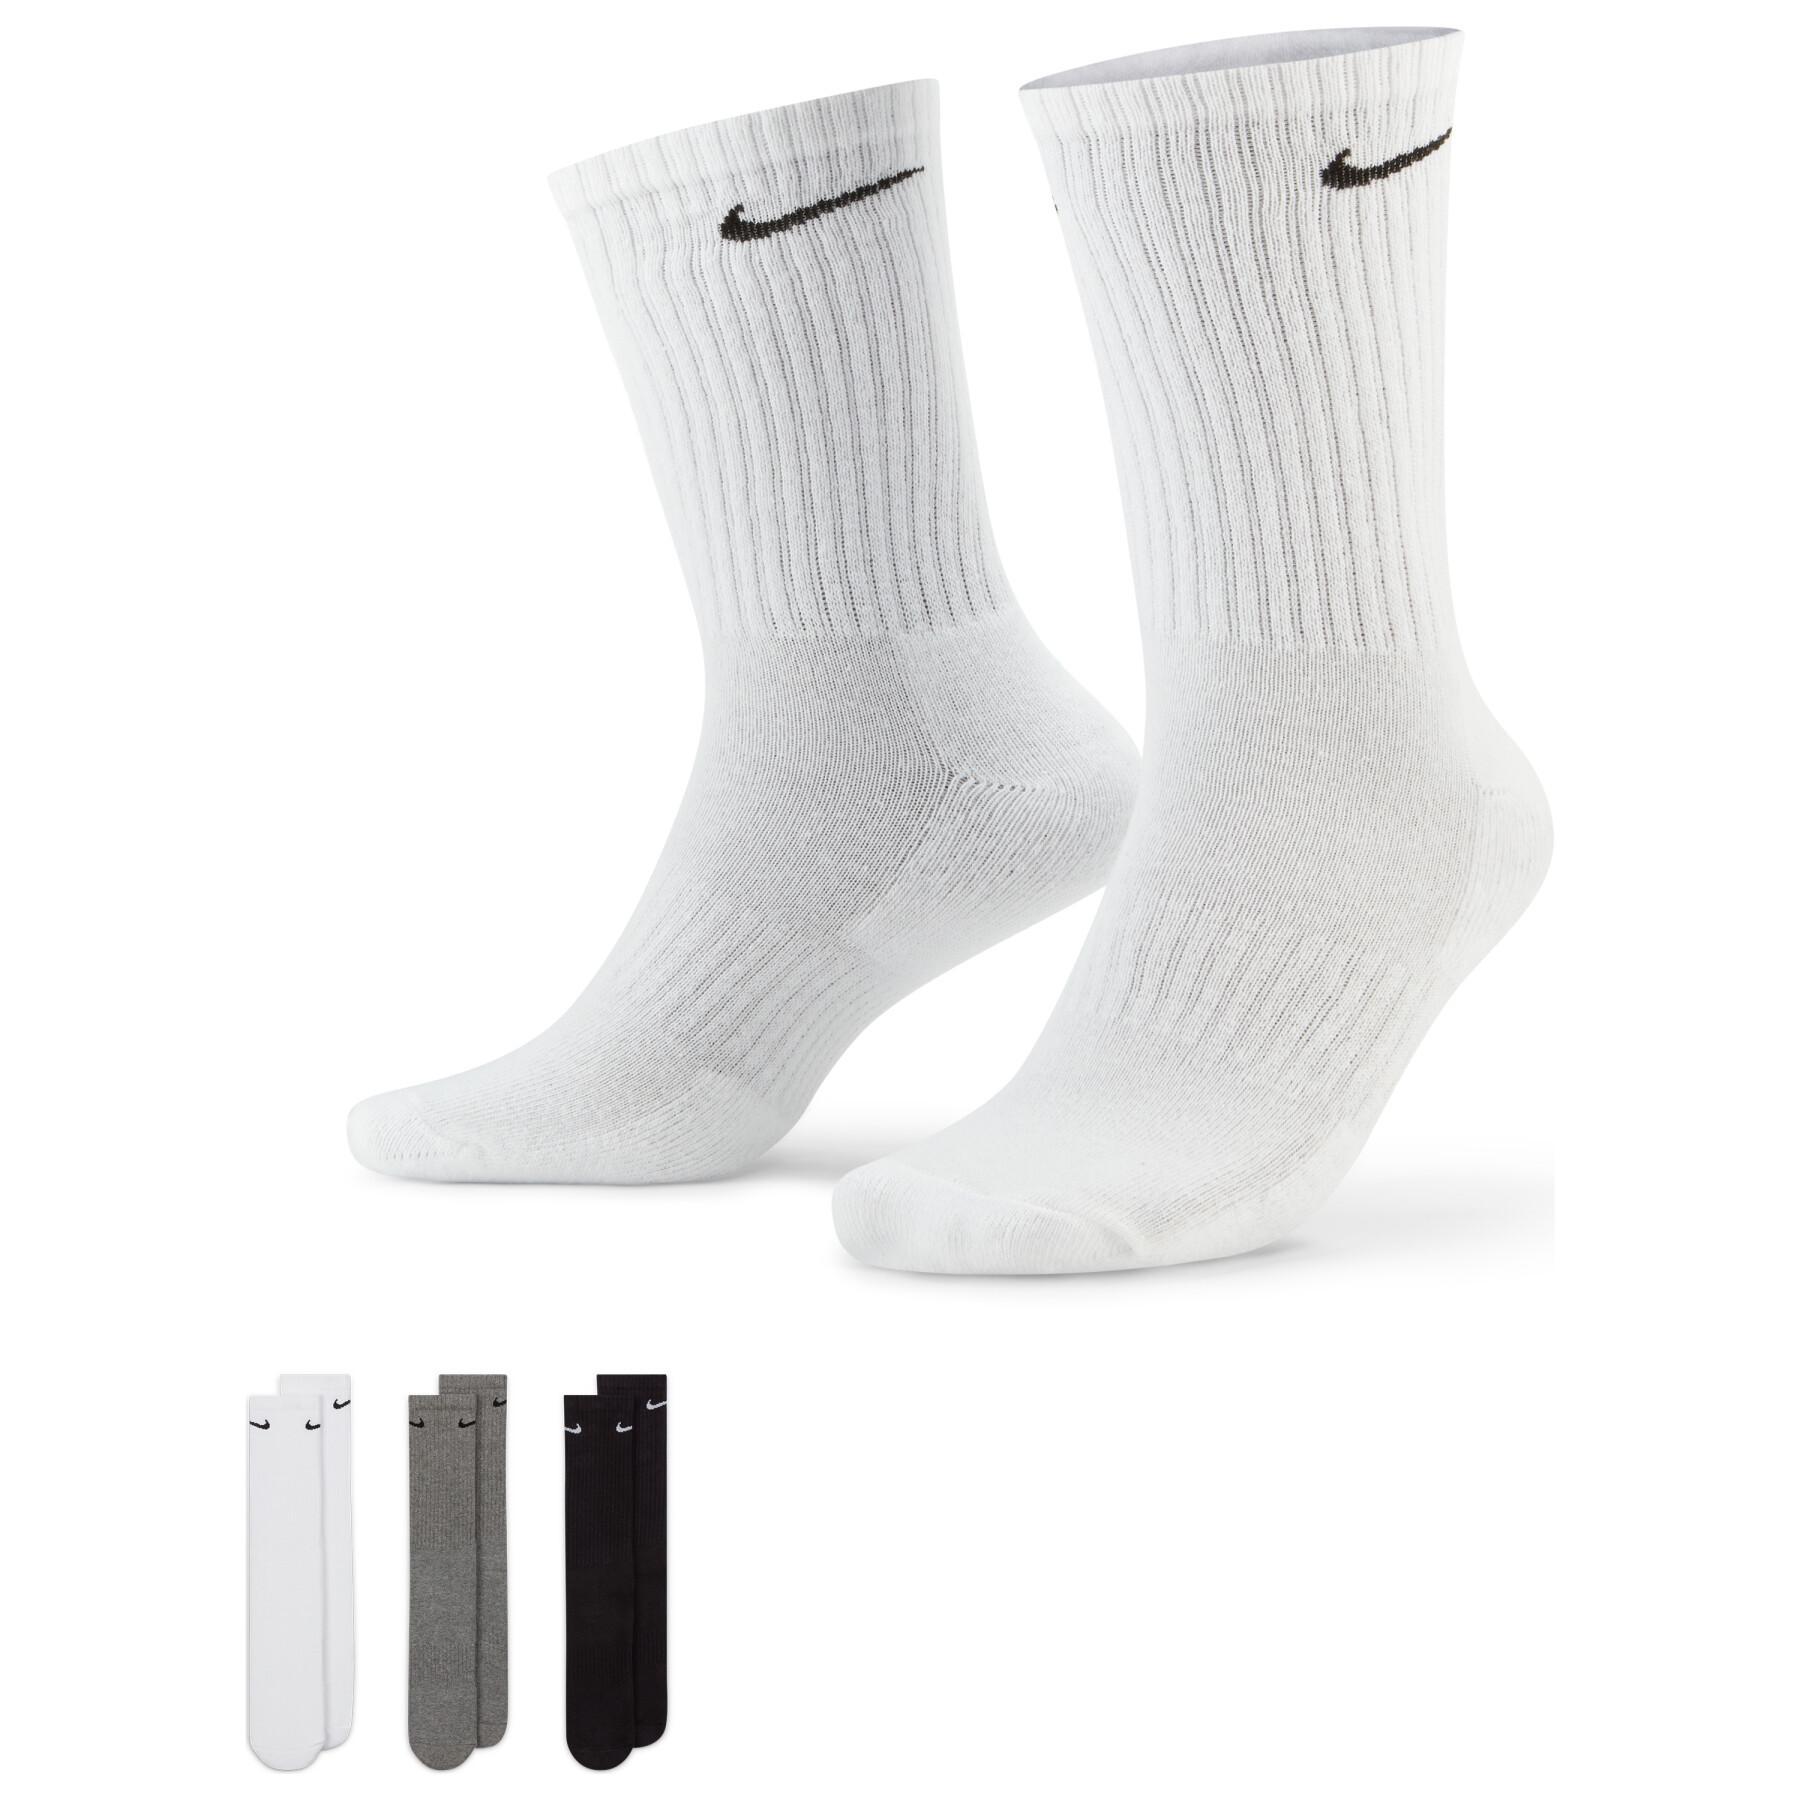 Chaussettes Nike everyday cushioned - Nike - Femme - Entretien physique